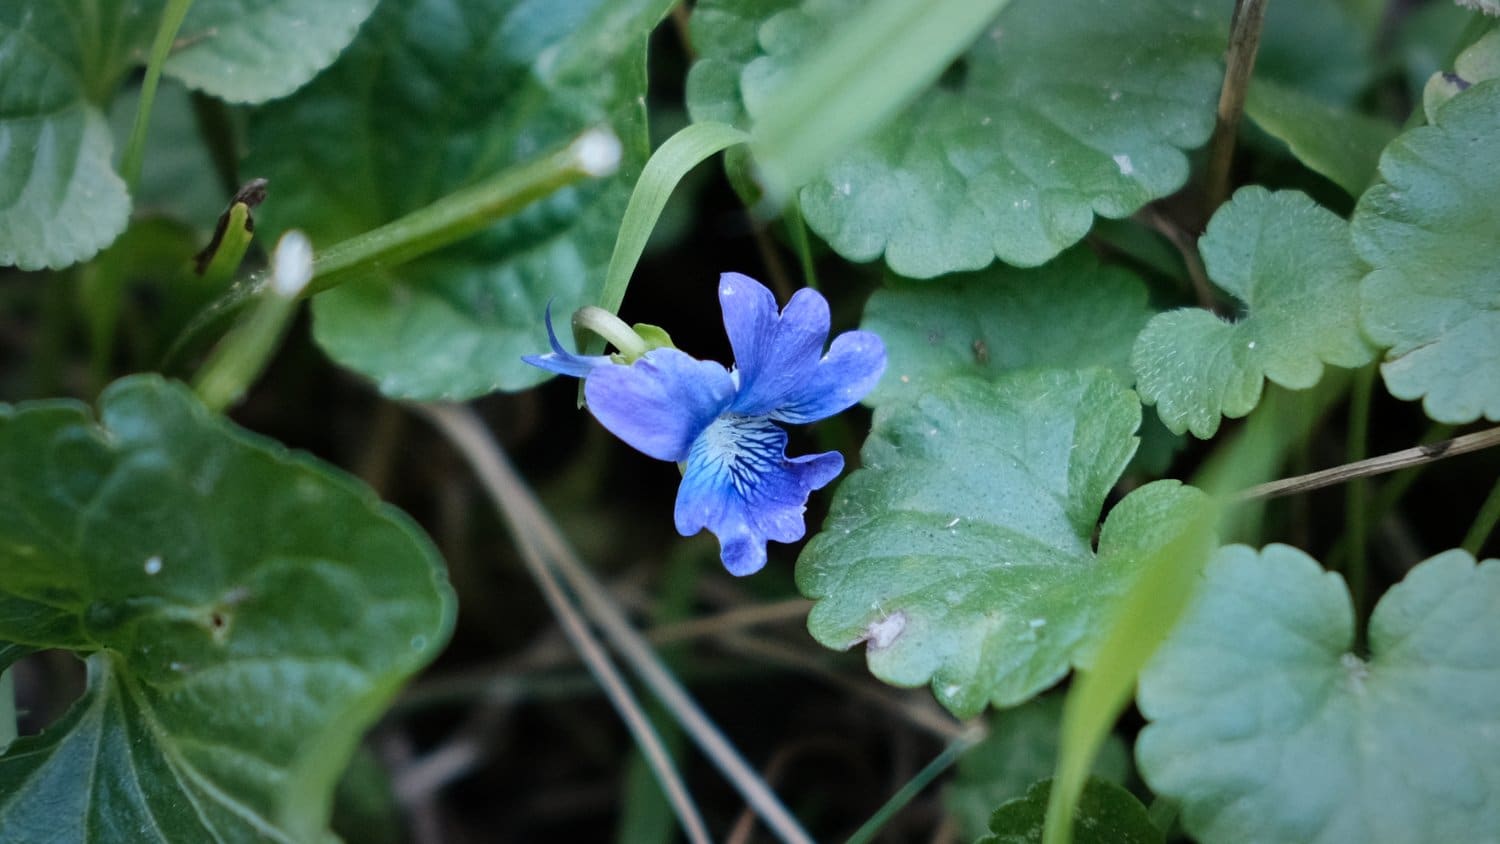 A blue violet surrounded by green leaves.